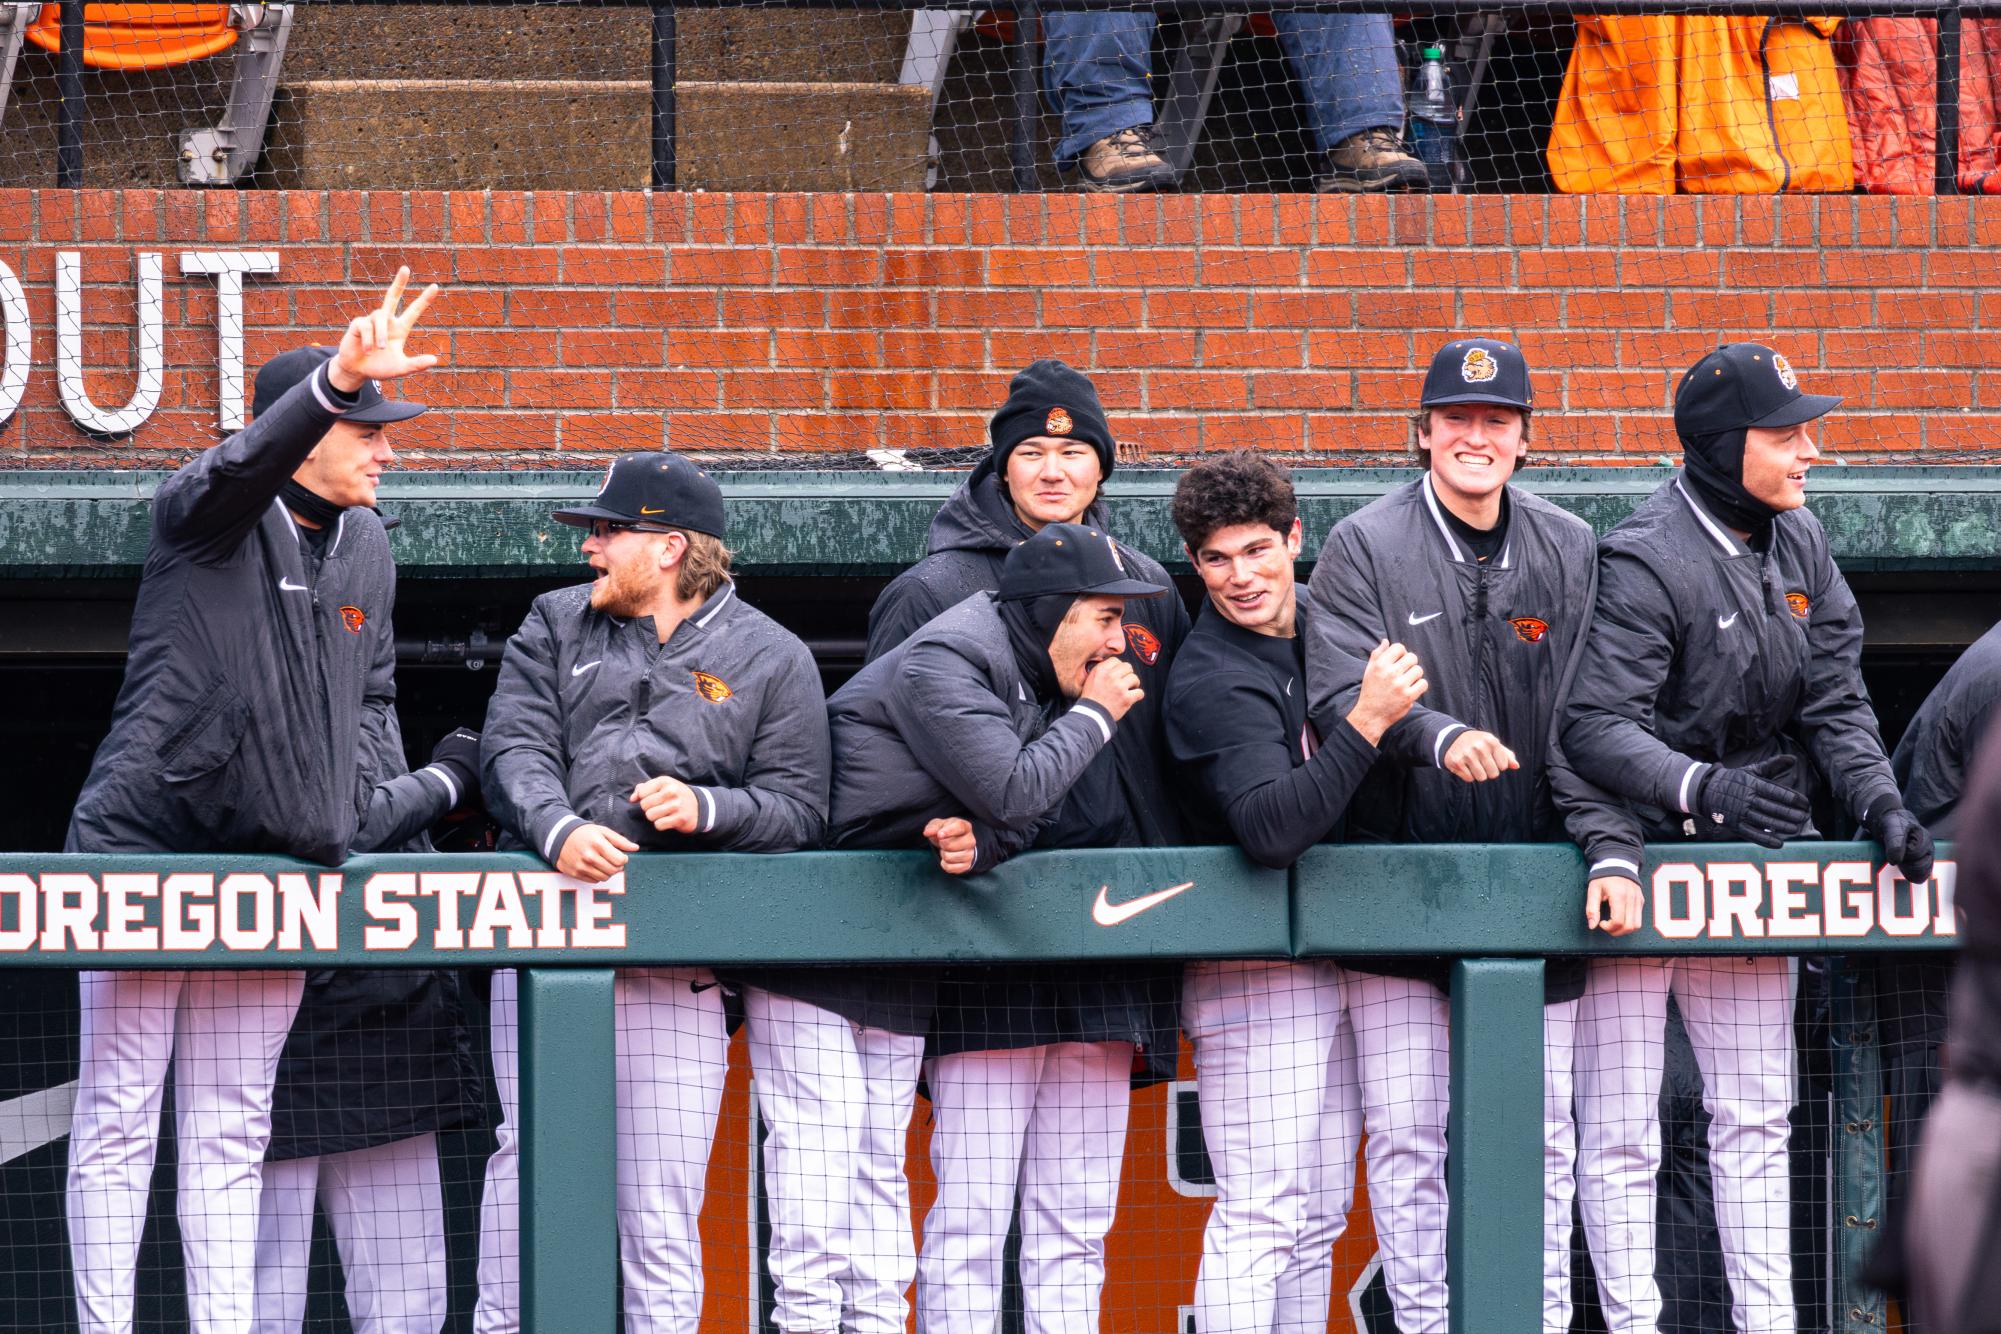 The Oregon State University baseball teammates cheer in the dugout after a home run by Mason Guerra (9) completes a throw out at first base to NDSU player at Goss Stadium at Coleman Field on March 3 in Corvallis, Oregon.